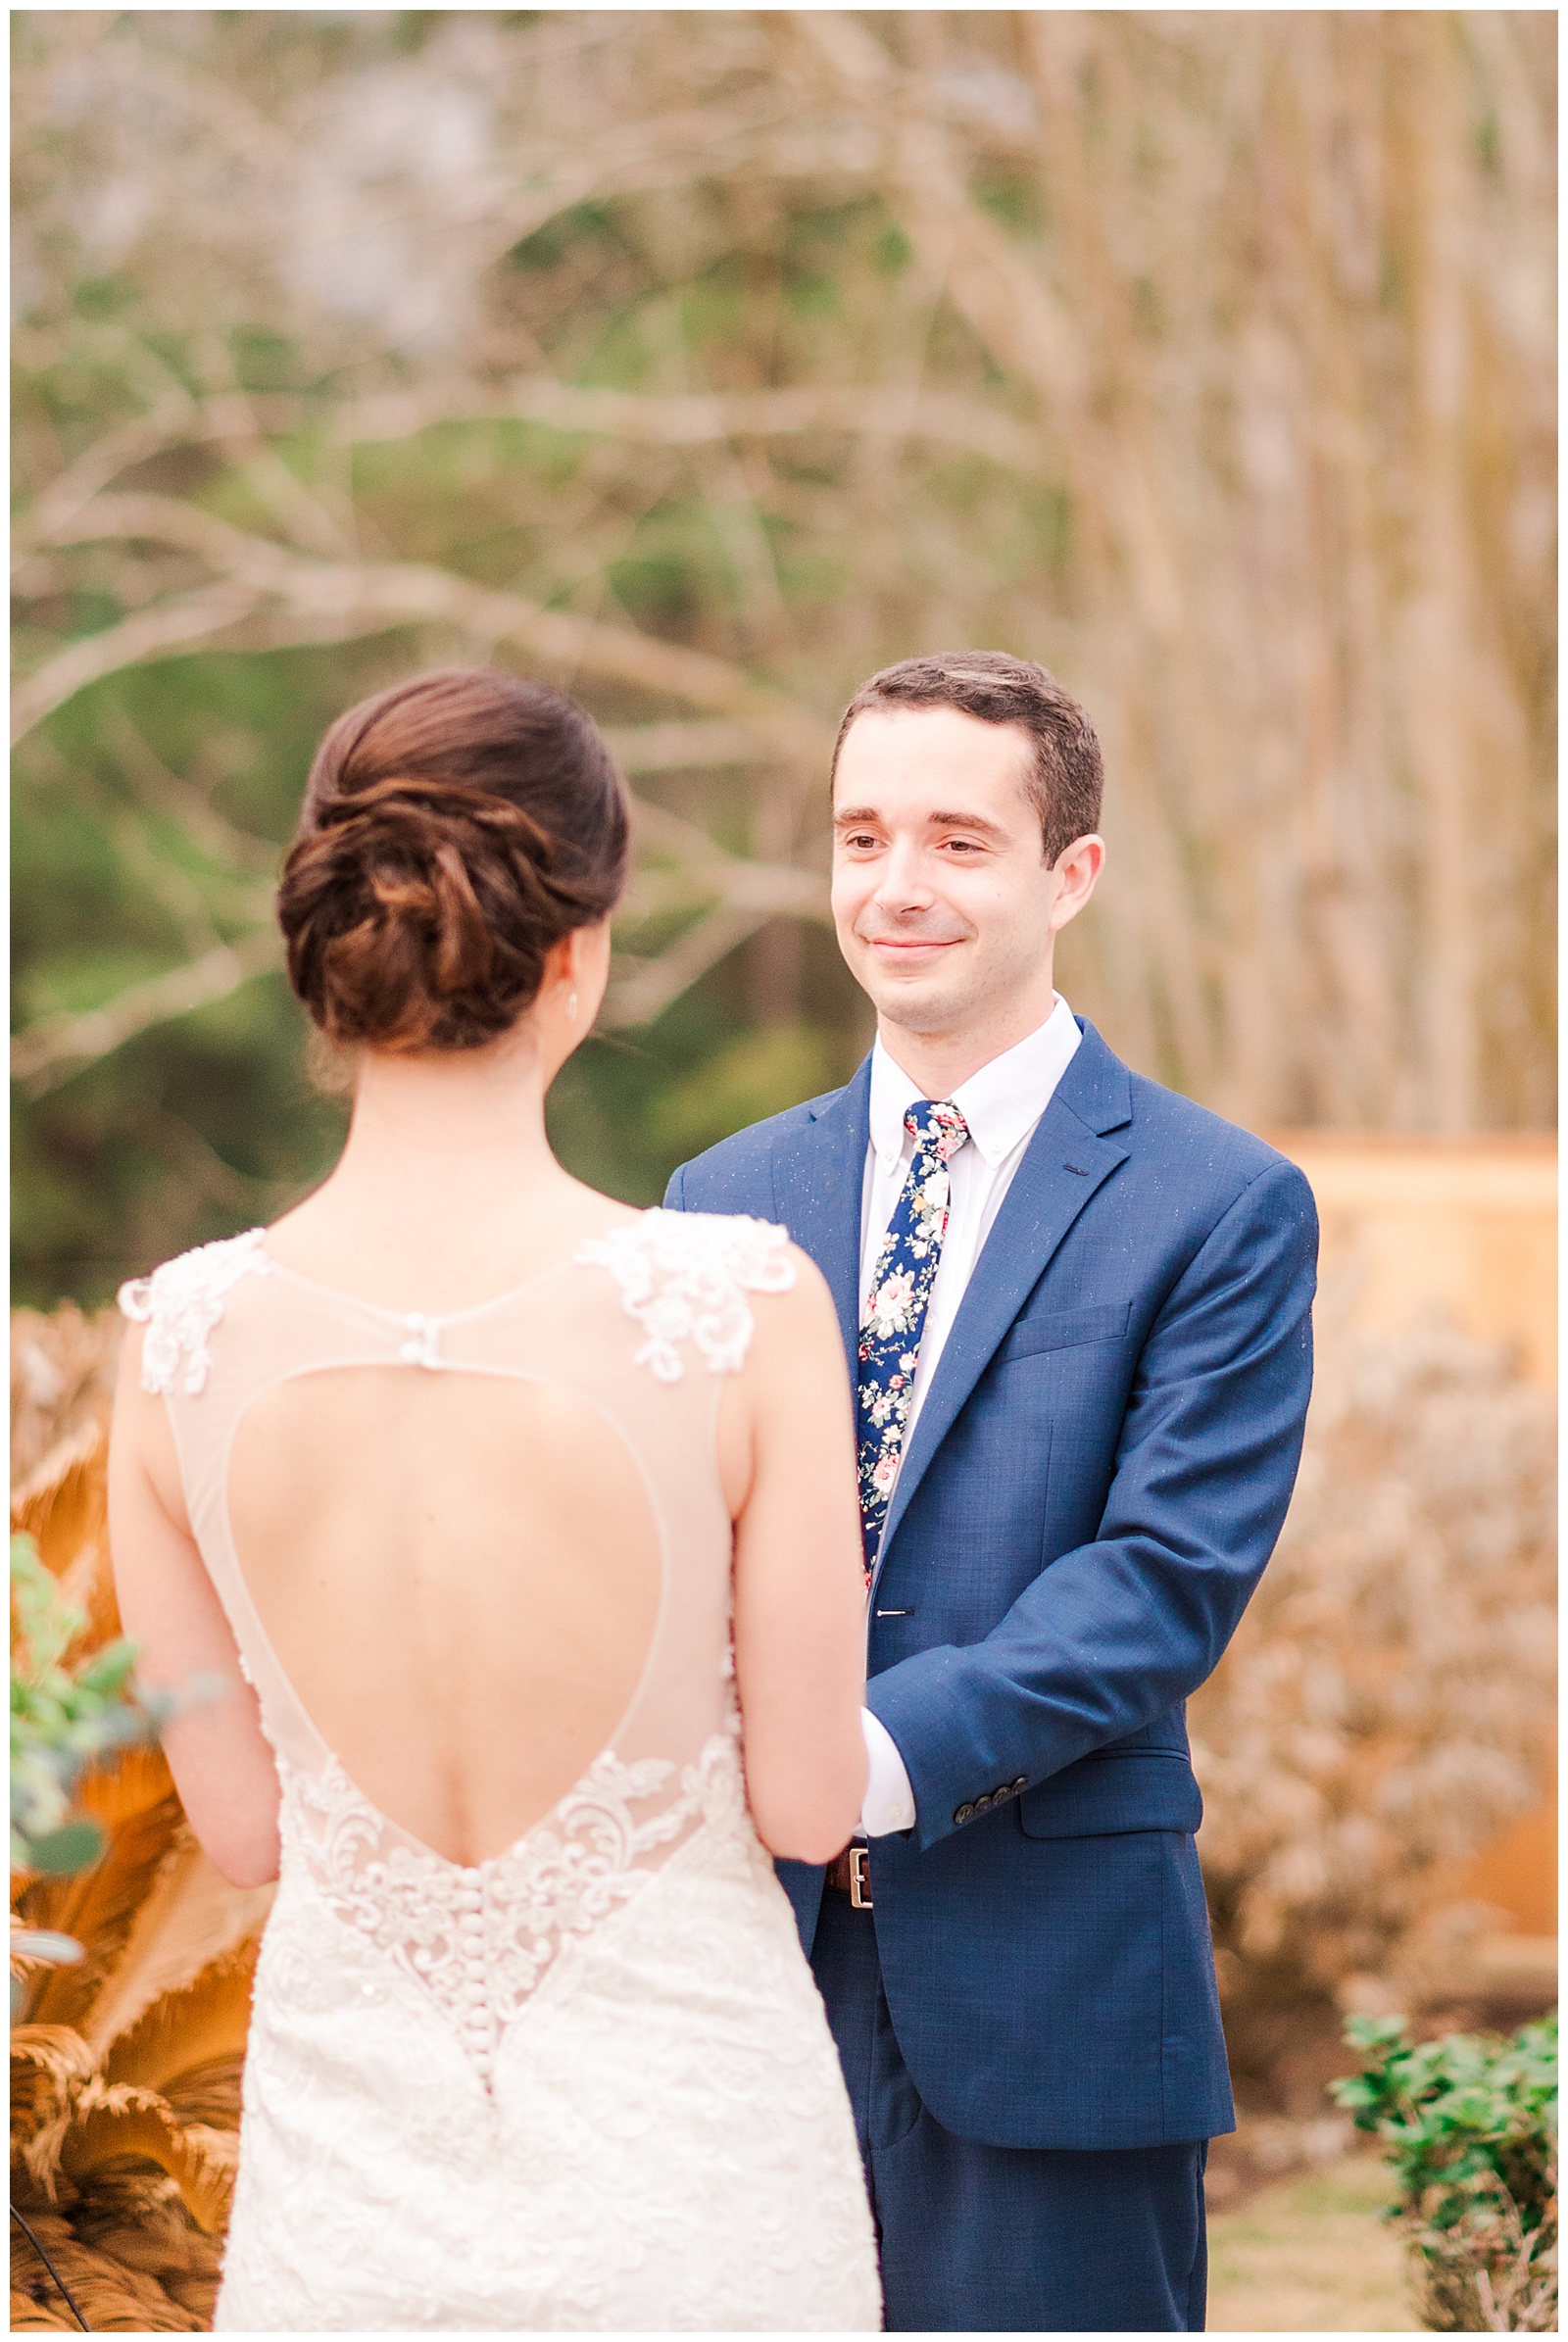 Winter wedding photography in The Woodlands